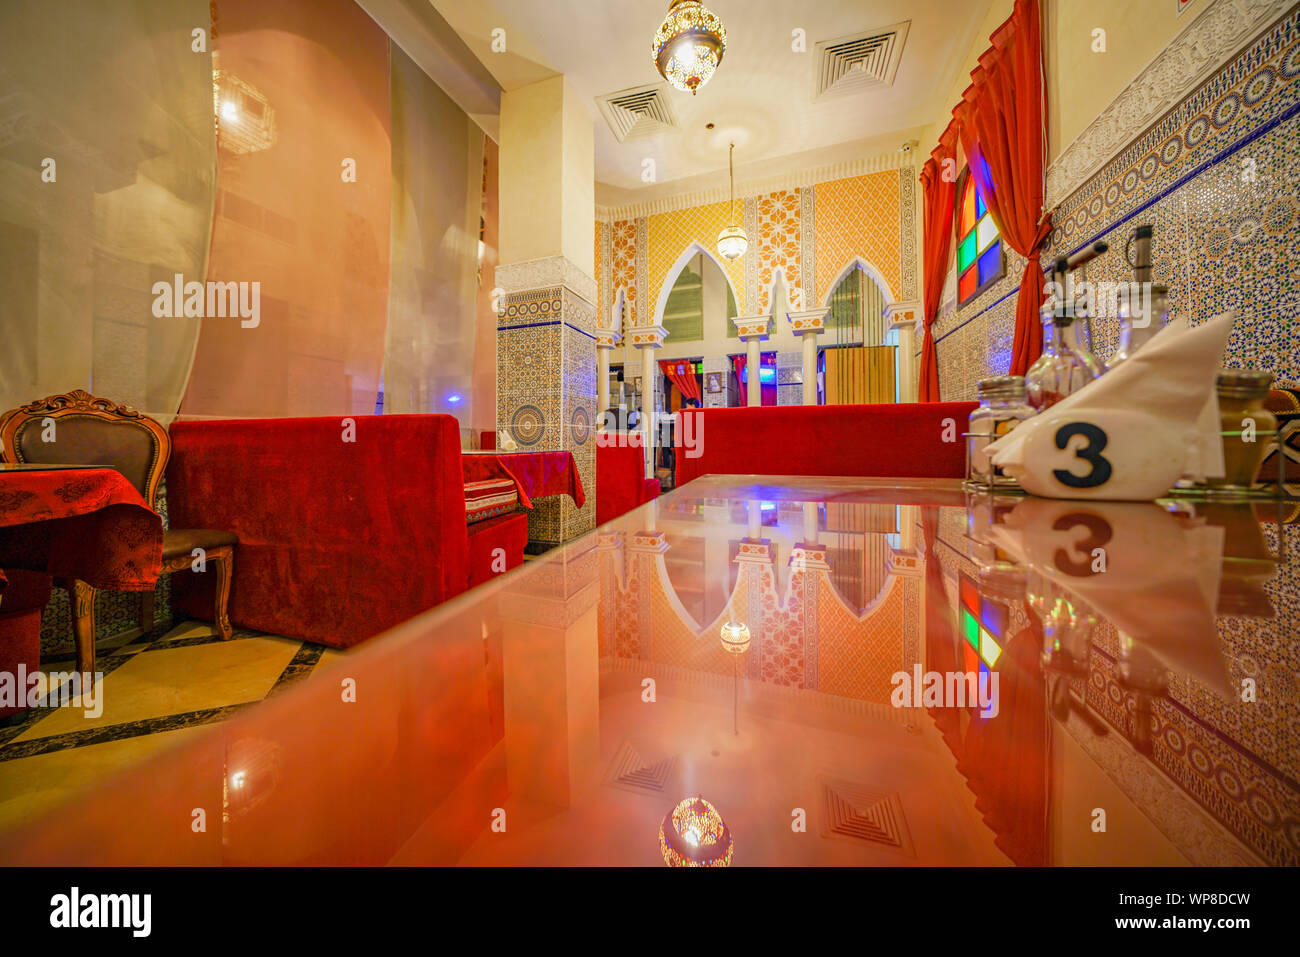 DOHA QATAR - JULY 11 2019; Interior Morrocan restaurant with typical interior decorreflected in high gloss table surface  in Souq Waqif. Stock Photo